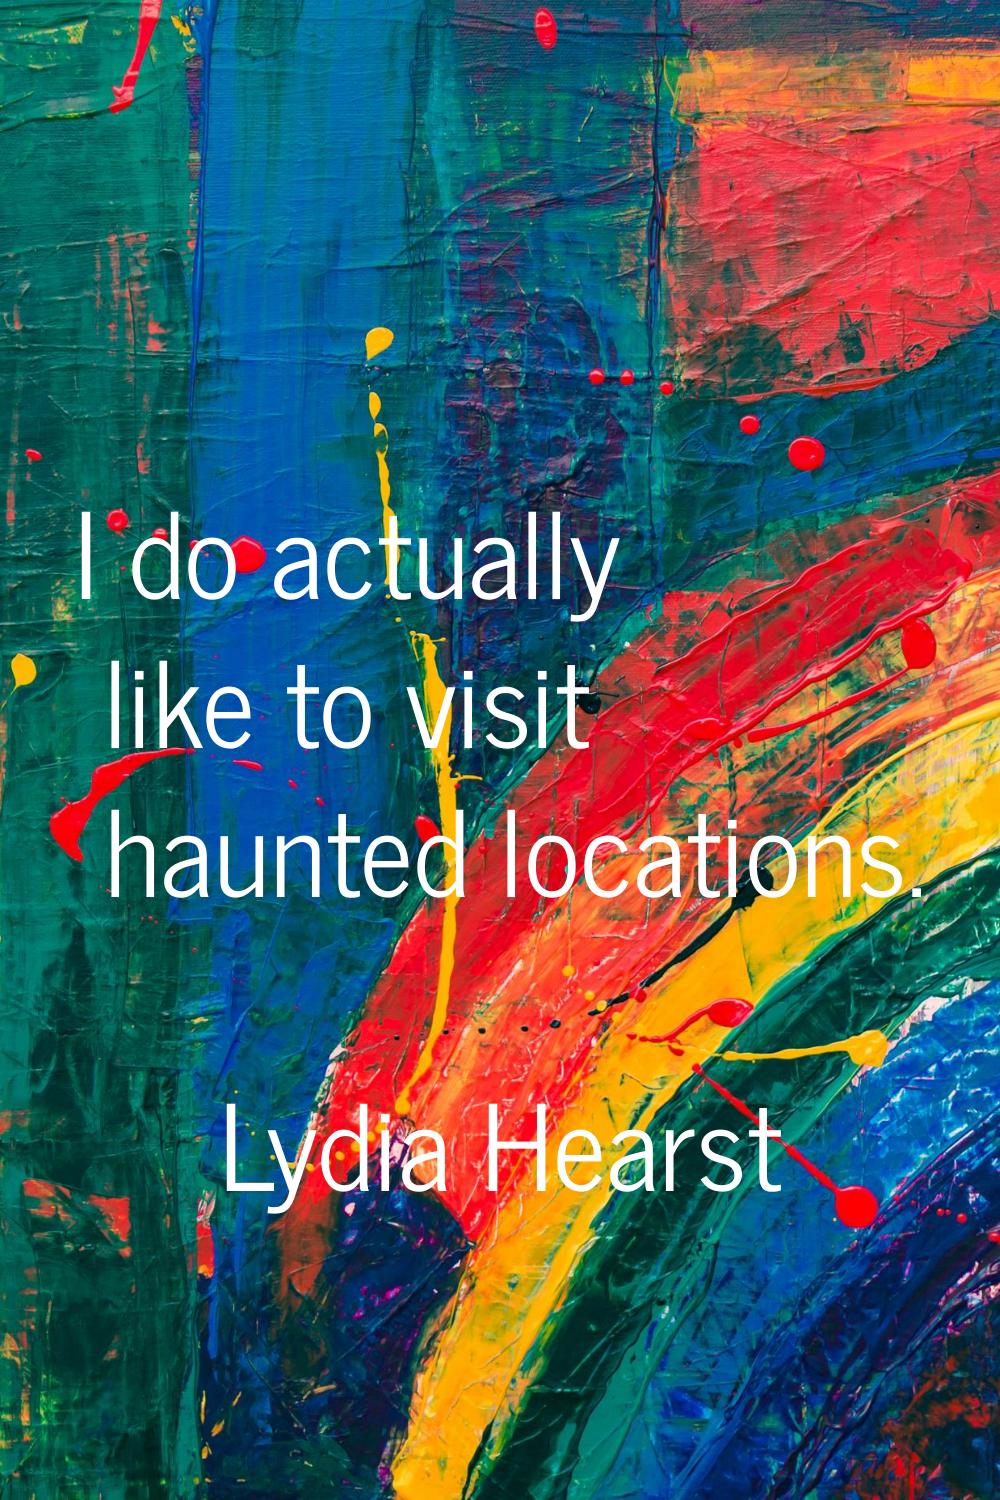 I do actually like to visit haunted locations.